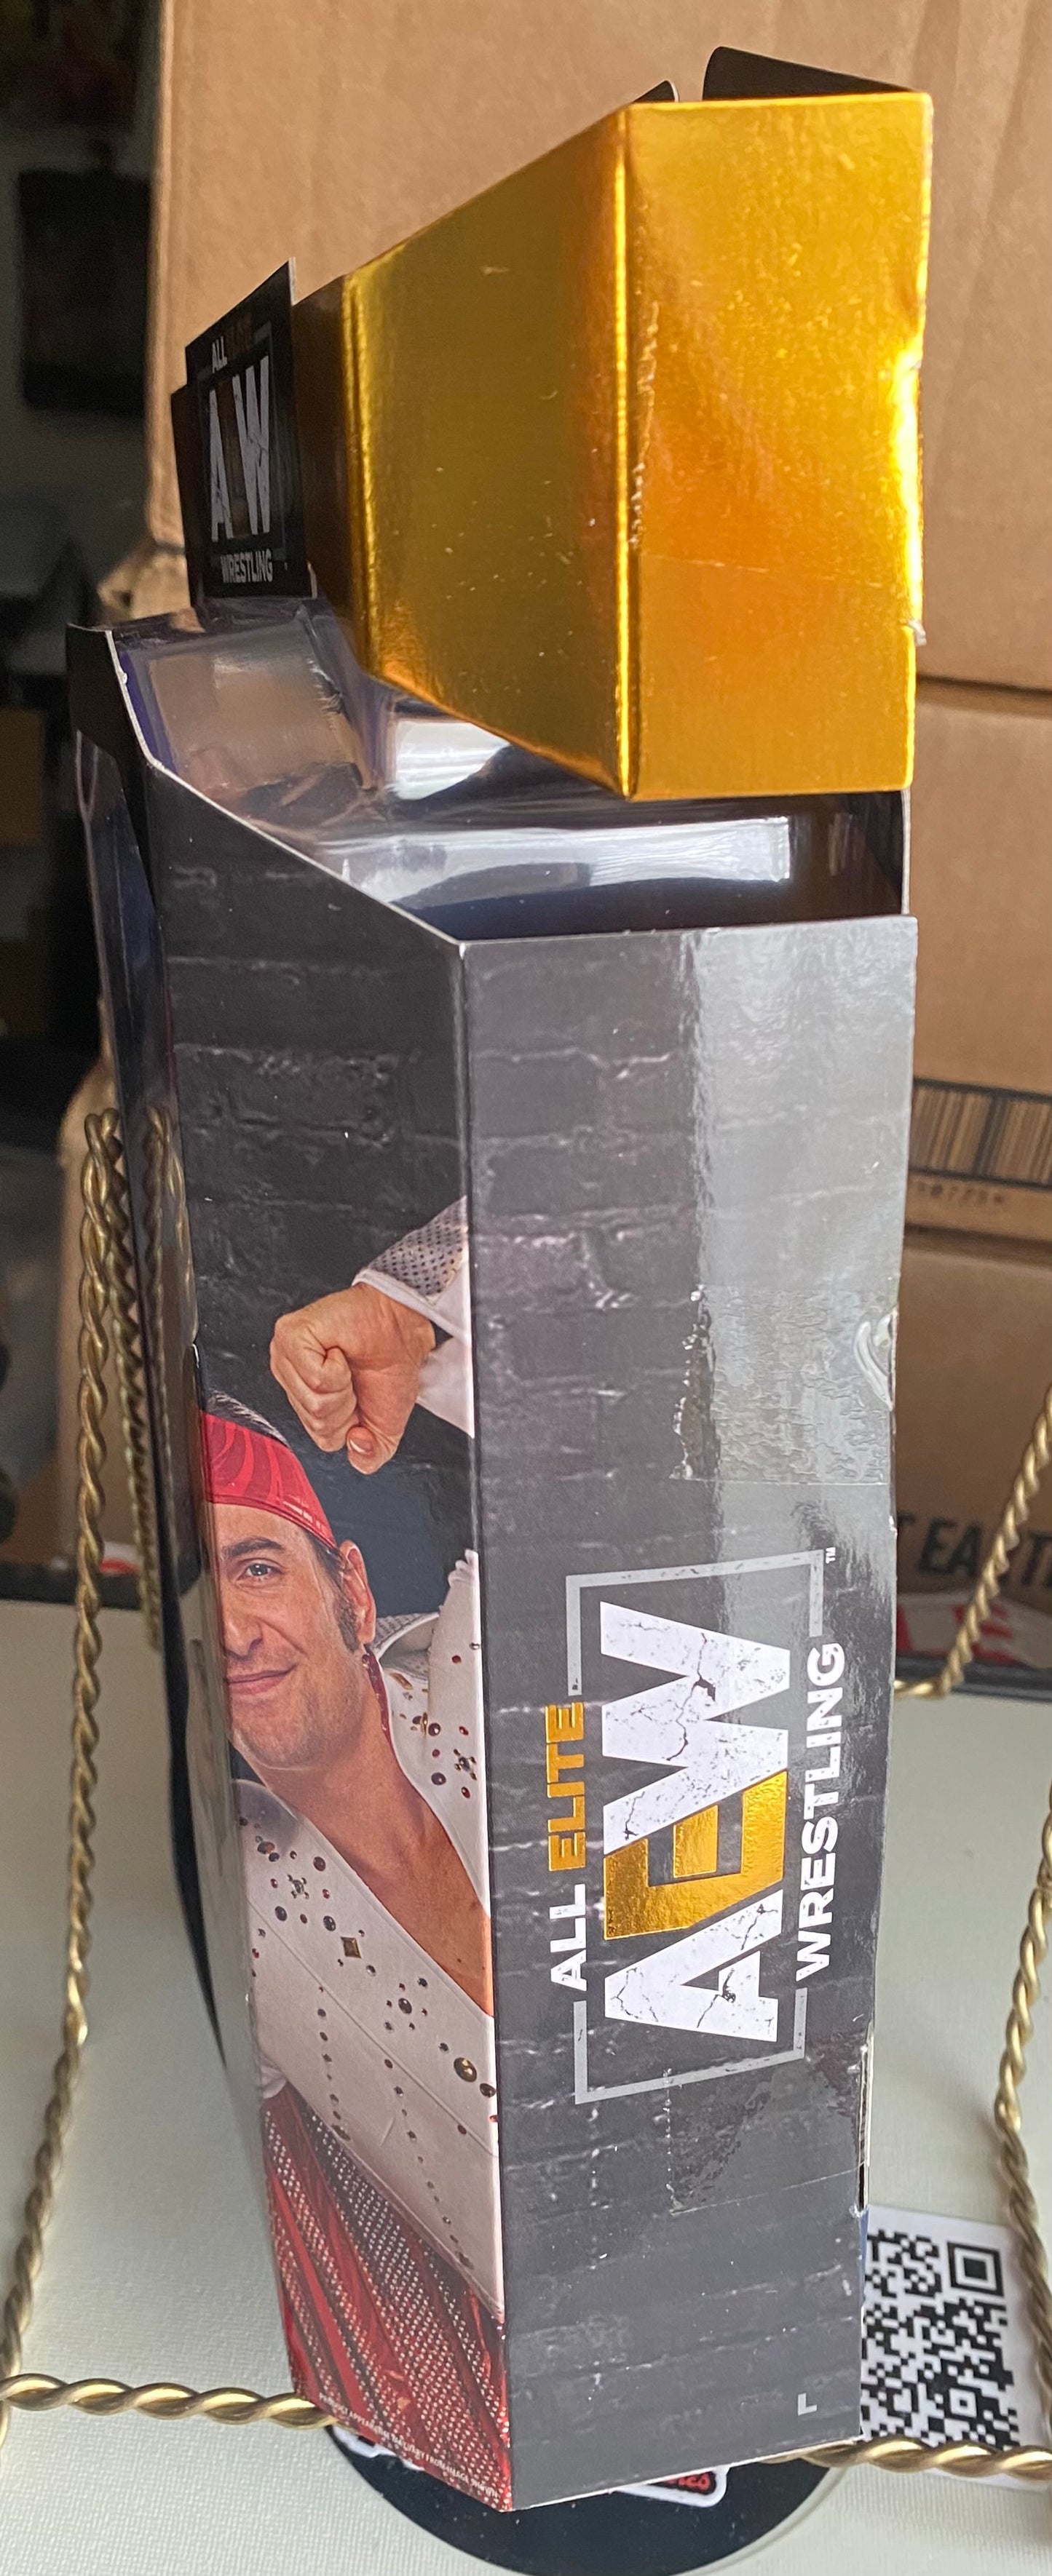 AEW Series 1 The Young Bucks 2 Pack